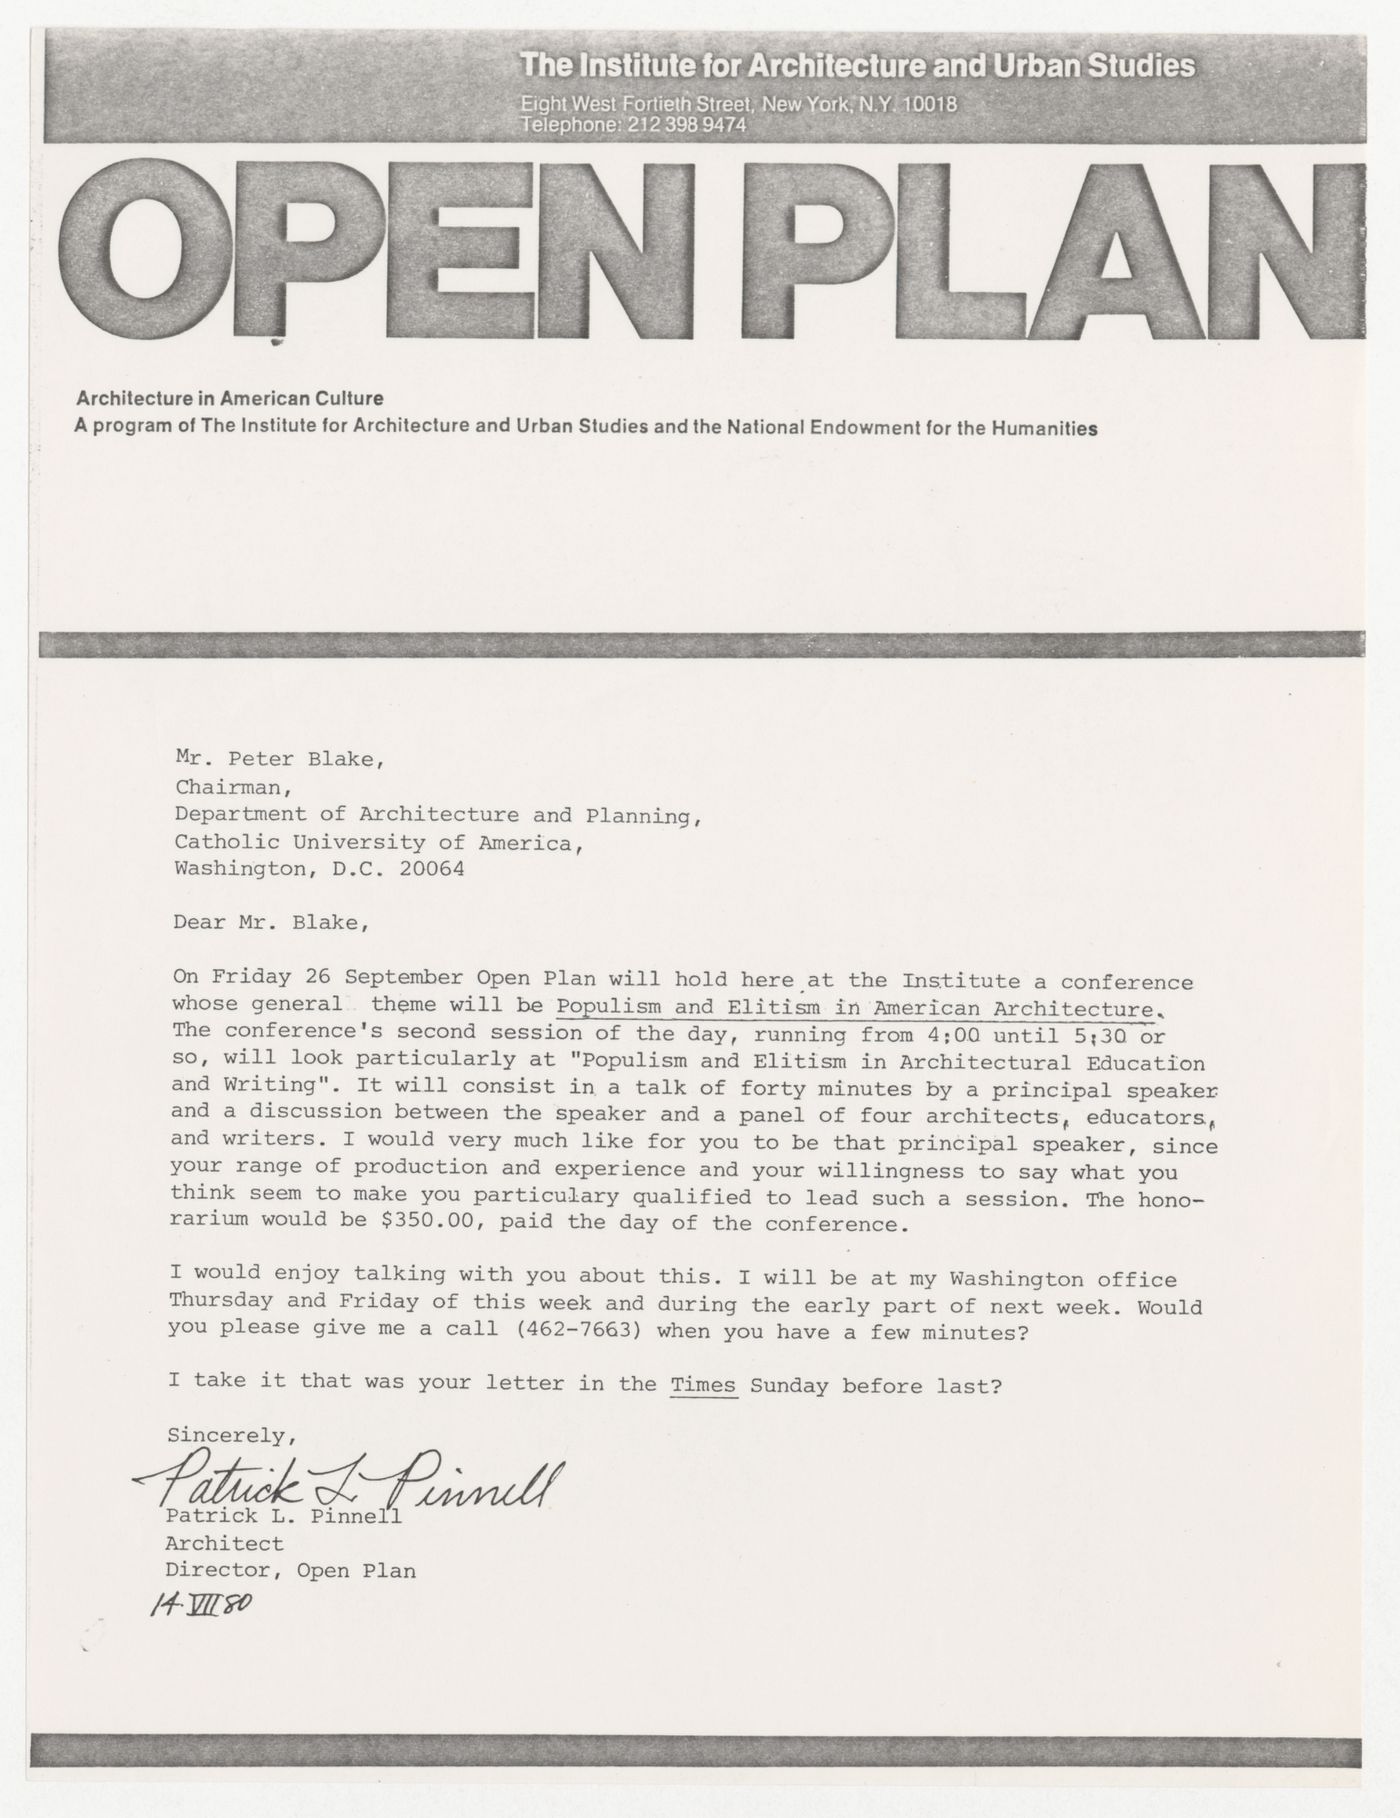 Letter from Patrick Pinnell to Peter Blake about Blake speaking at Open Plan